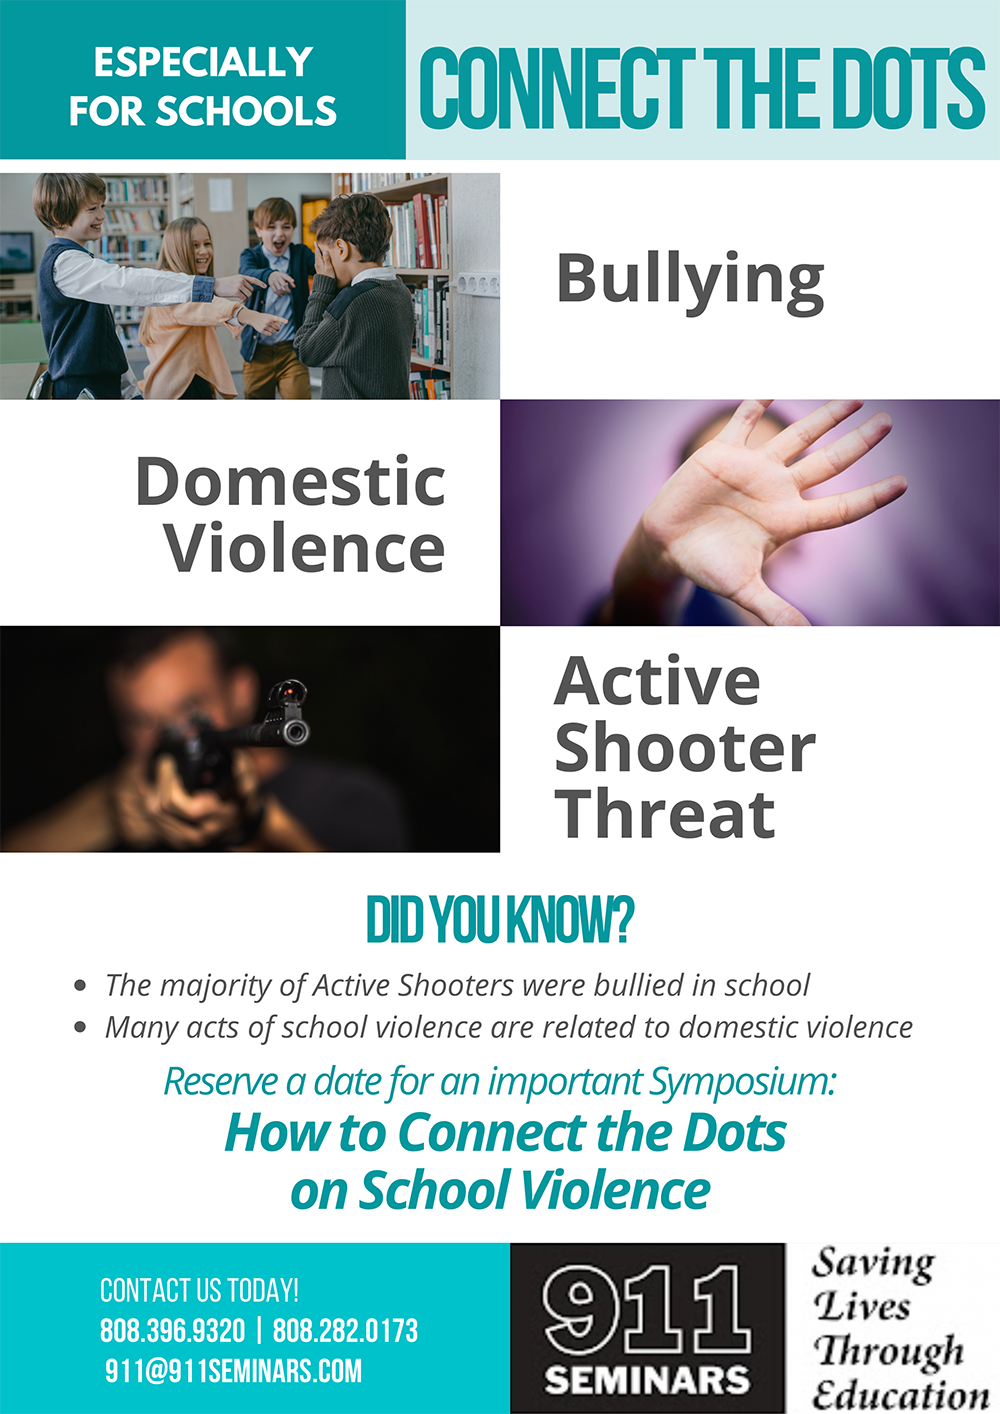 How to Connect the Dots on School Violence